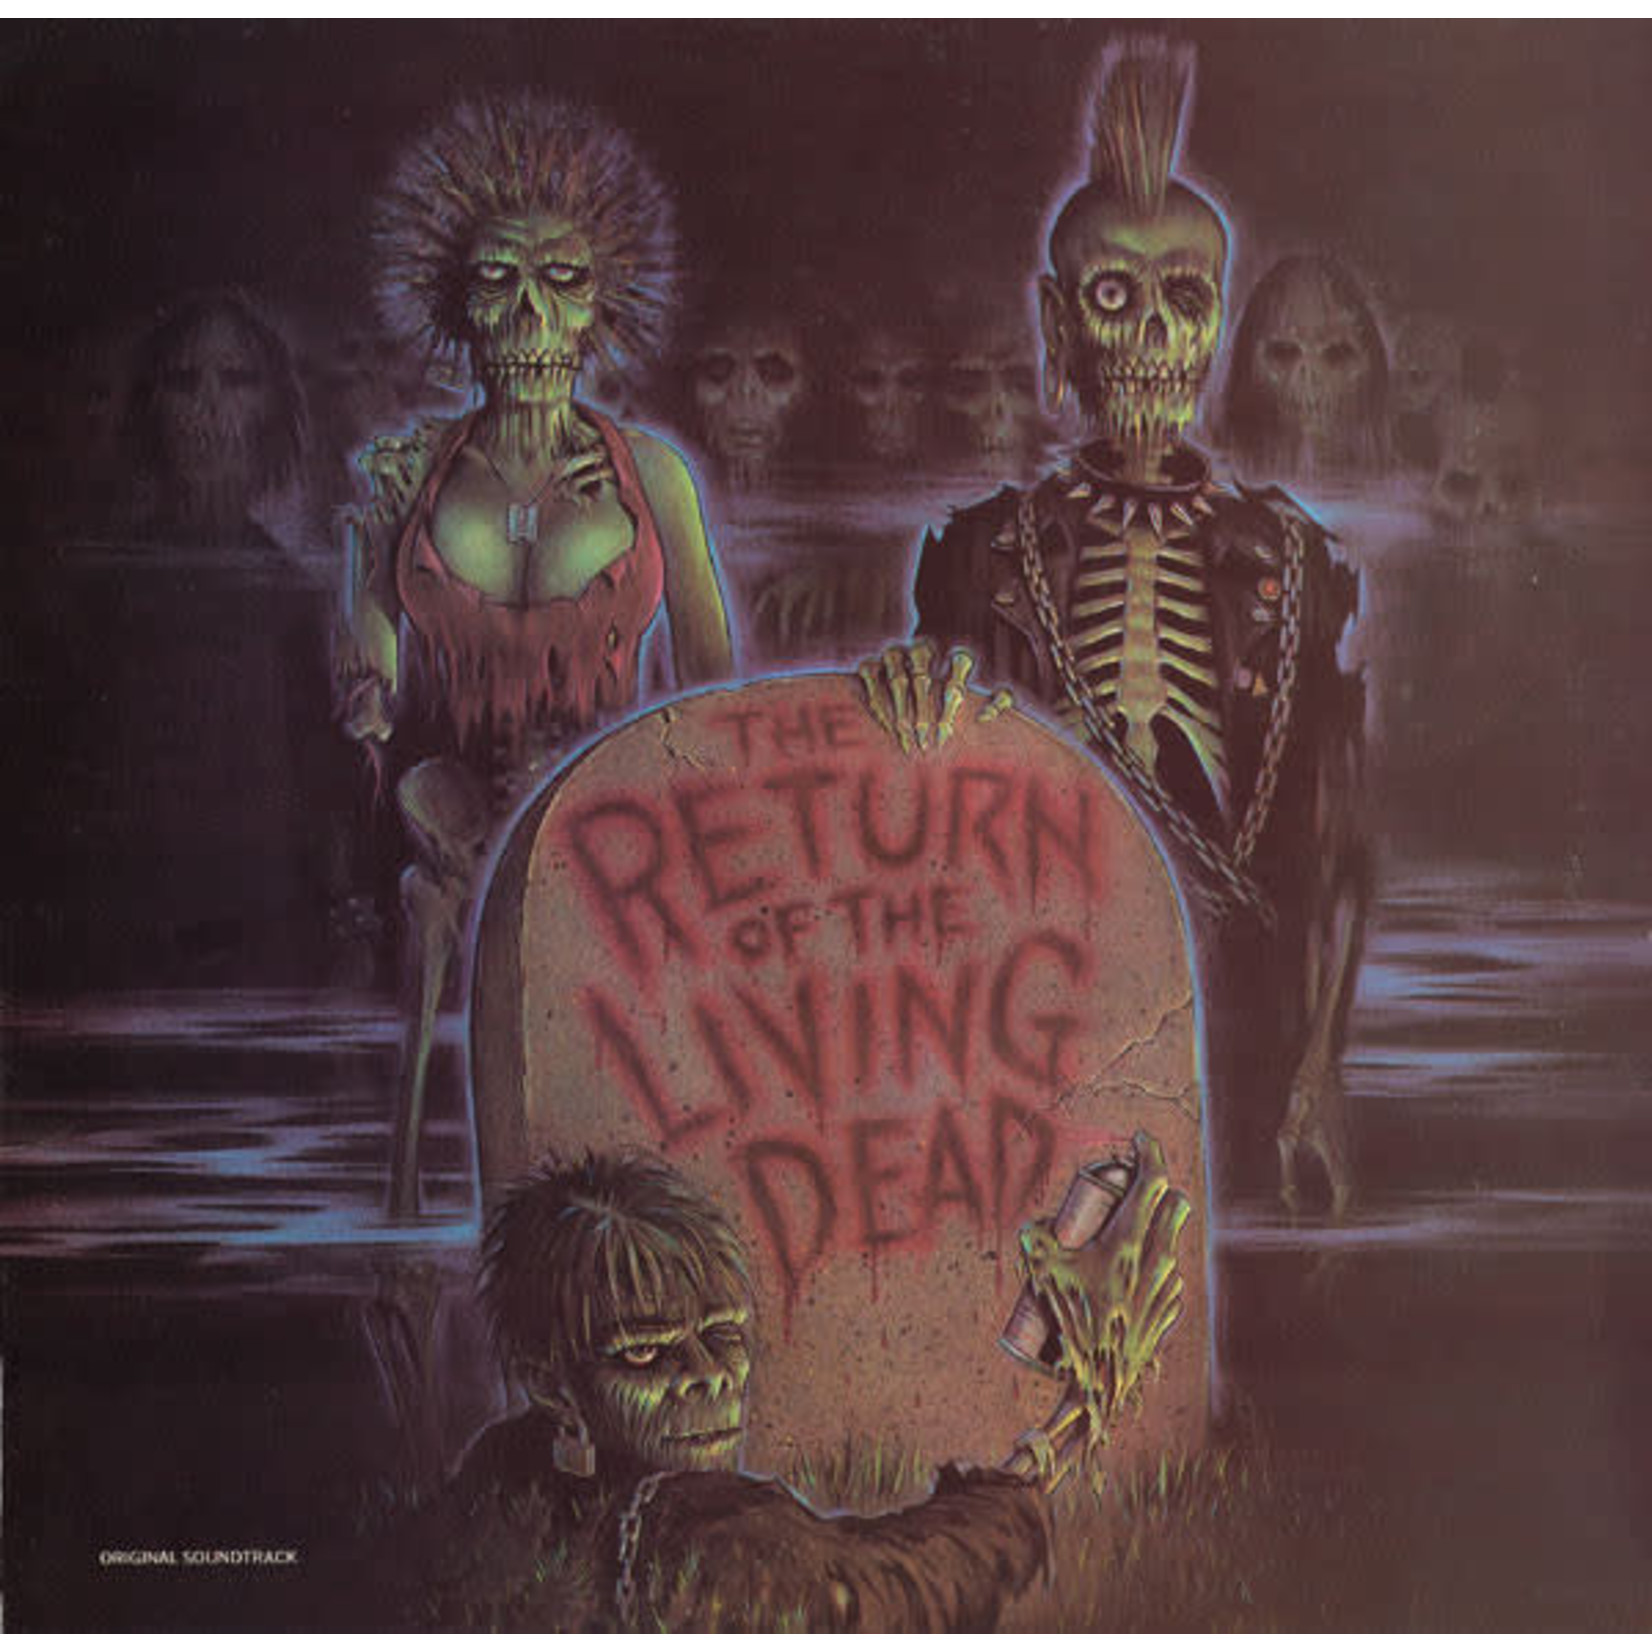 [Kollectibles] Various Artists - The Return of The Living Dead (Original Soundtrack) (1985 US, Cover VG/Disc VG+)